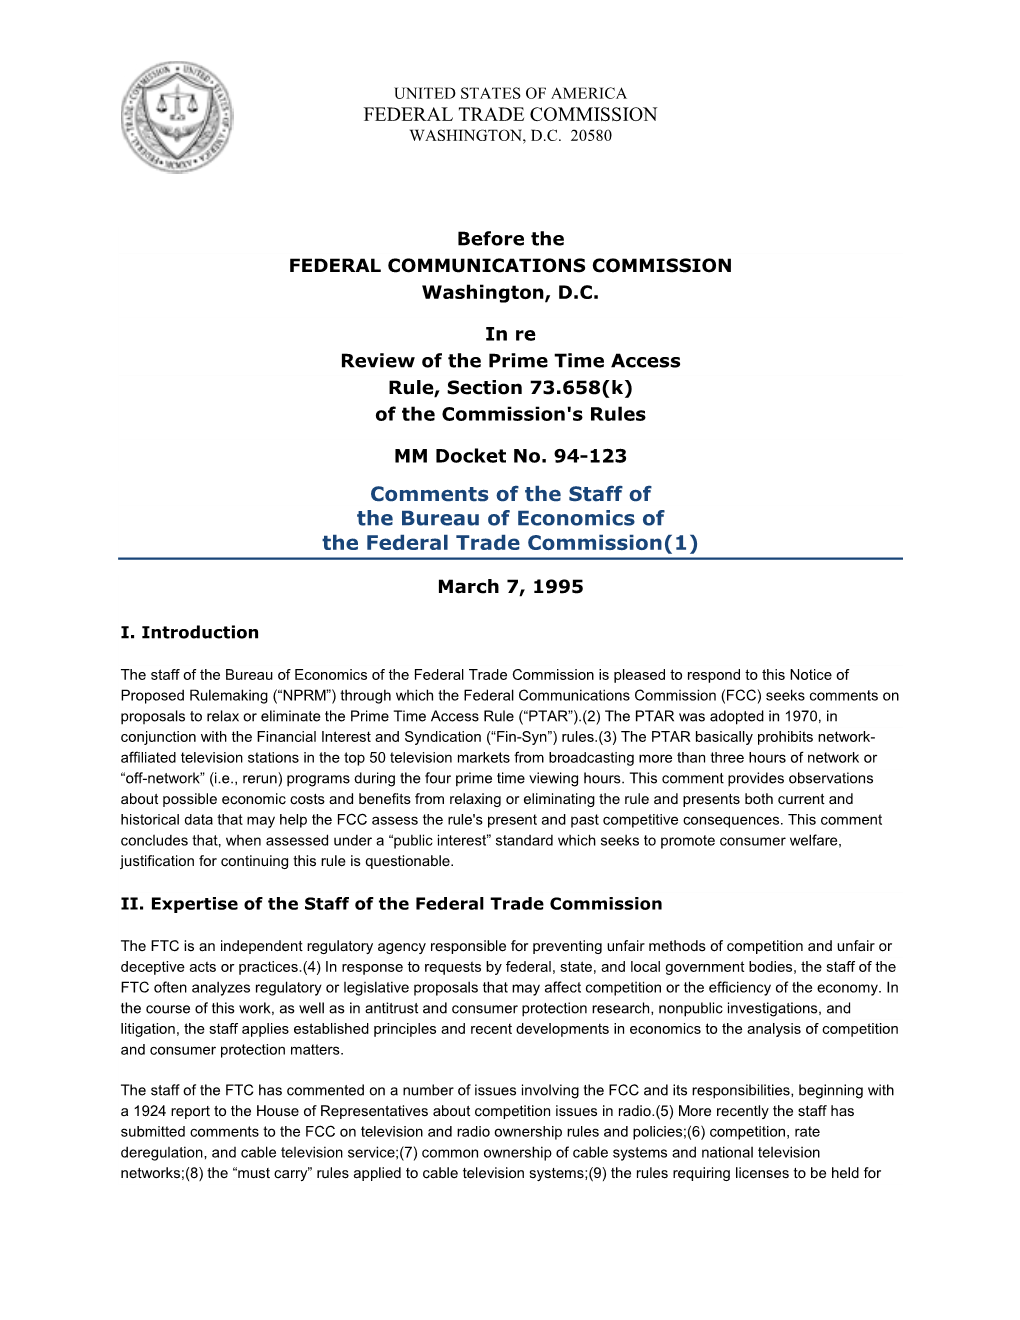 FTC Staff Comment Before the Federal Communications